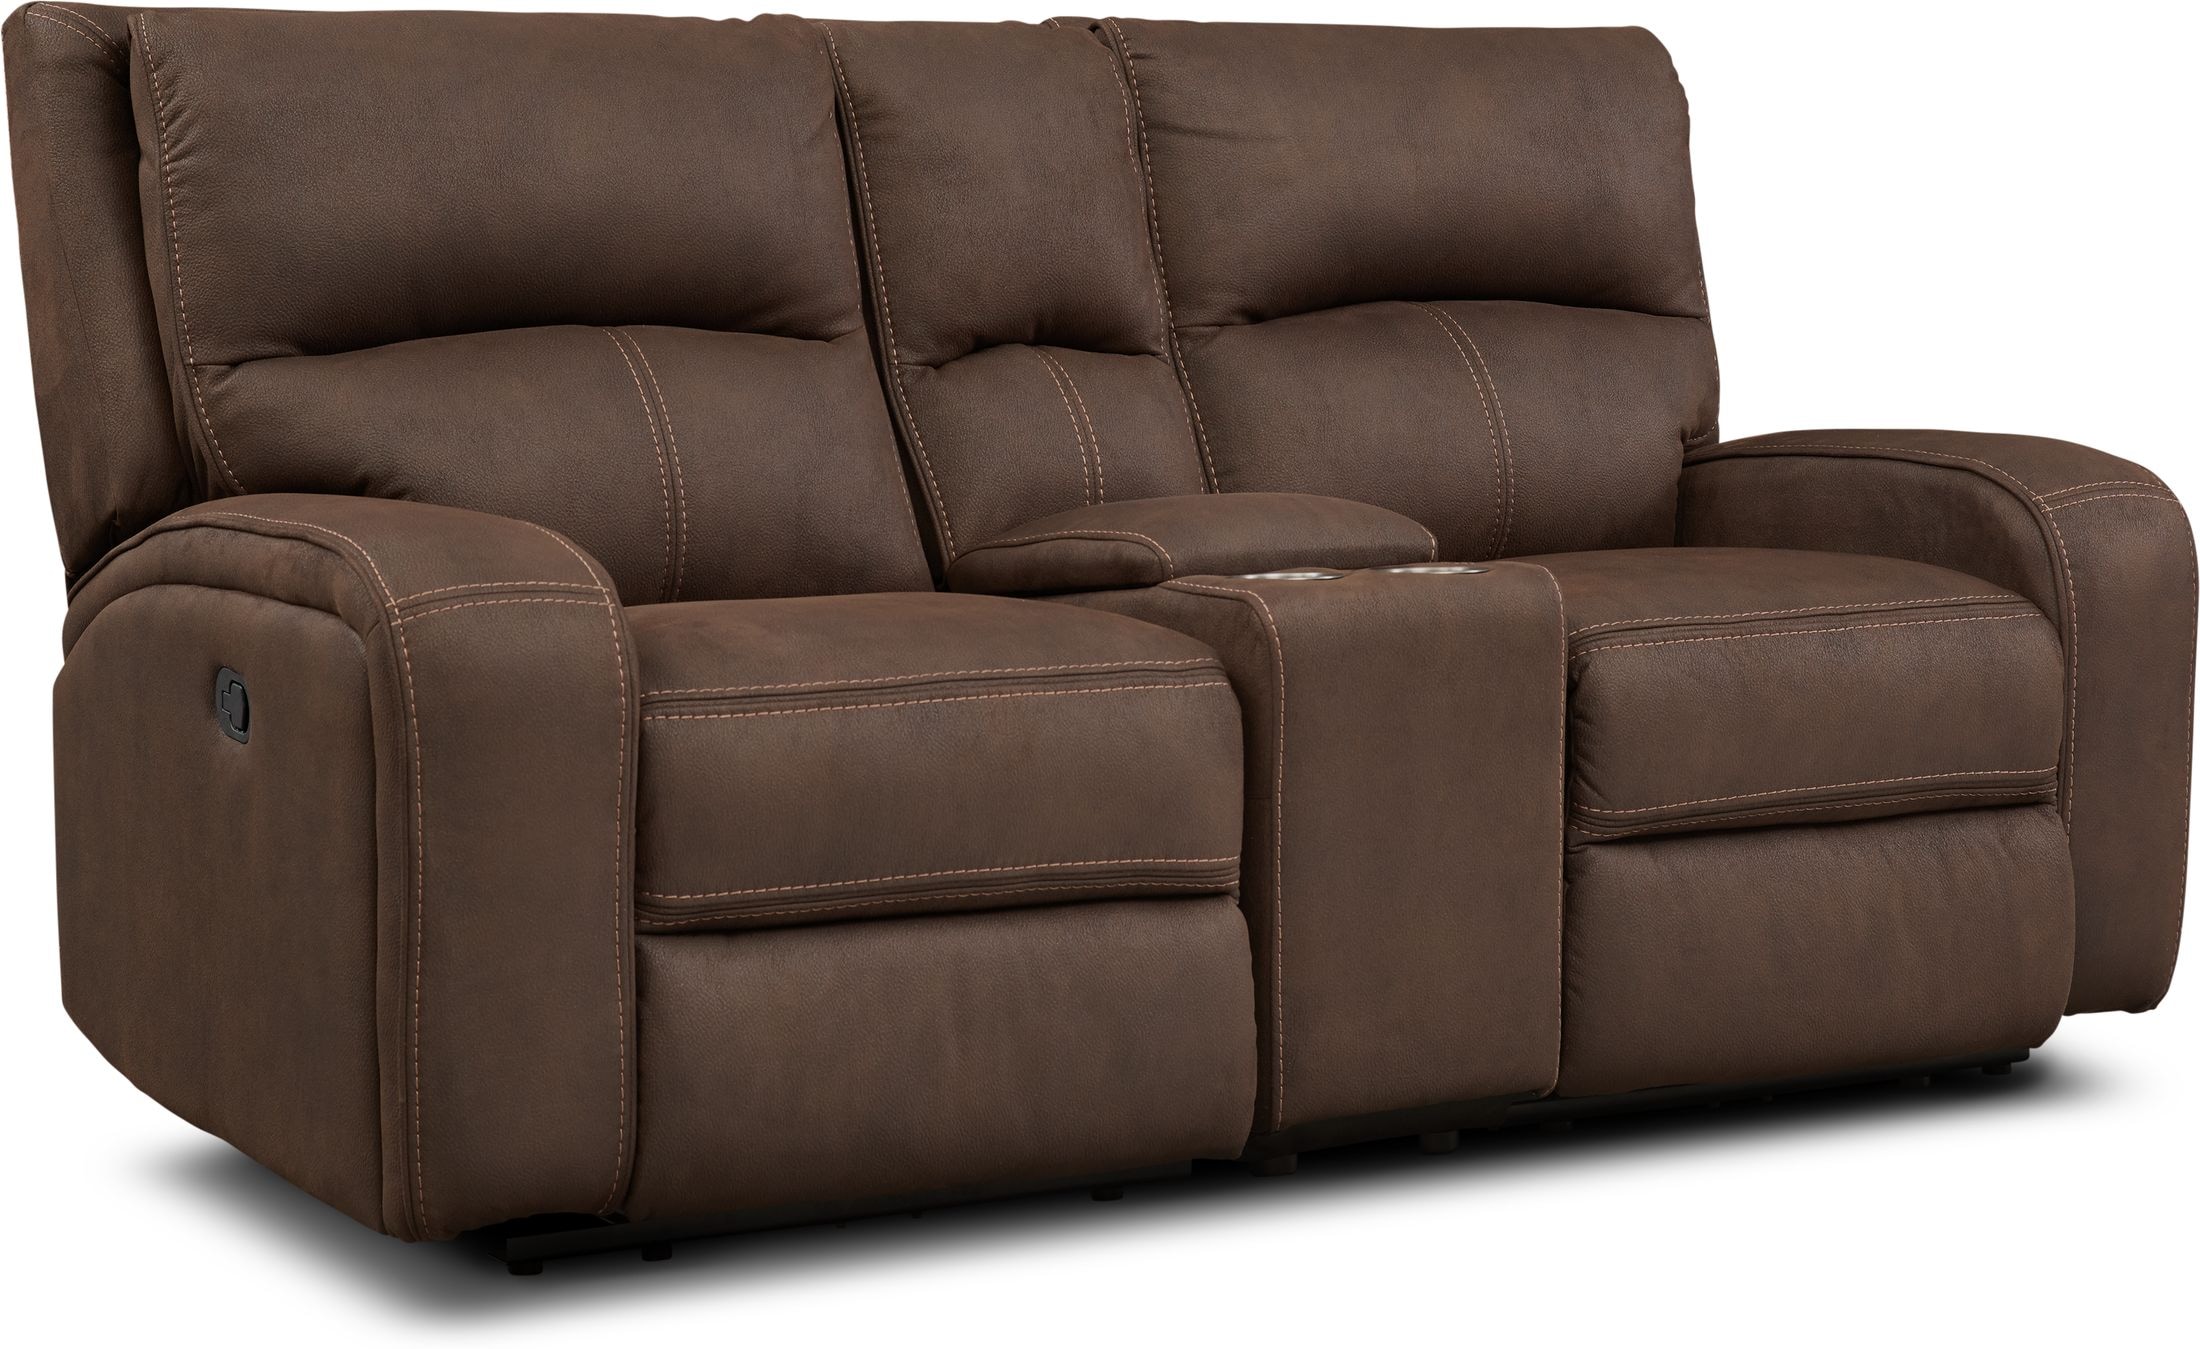 Undefined American Signature Furniture, Light Brown Leather Loveseat Recliner